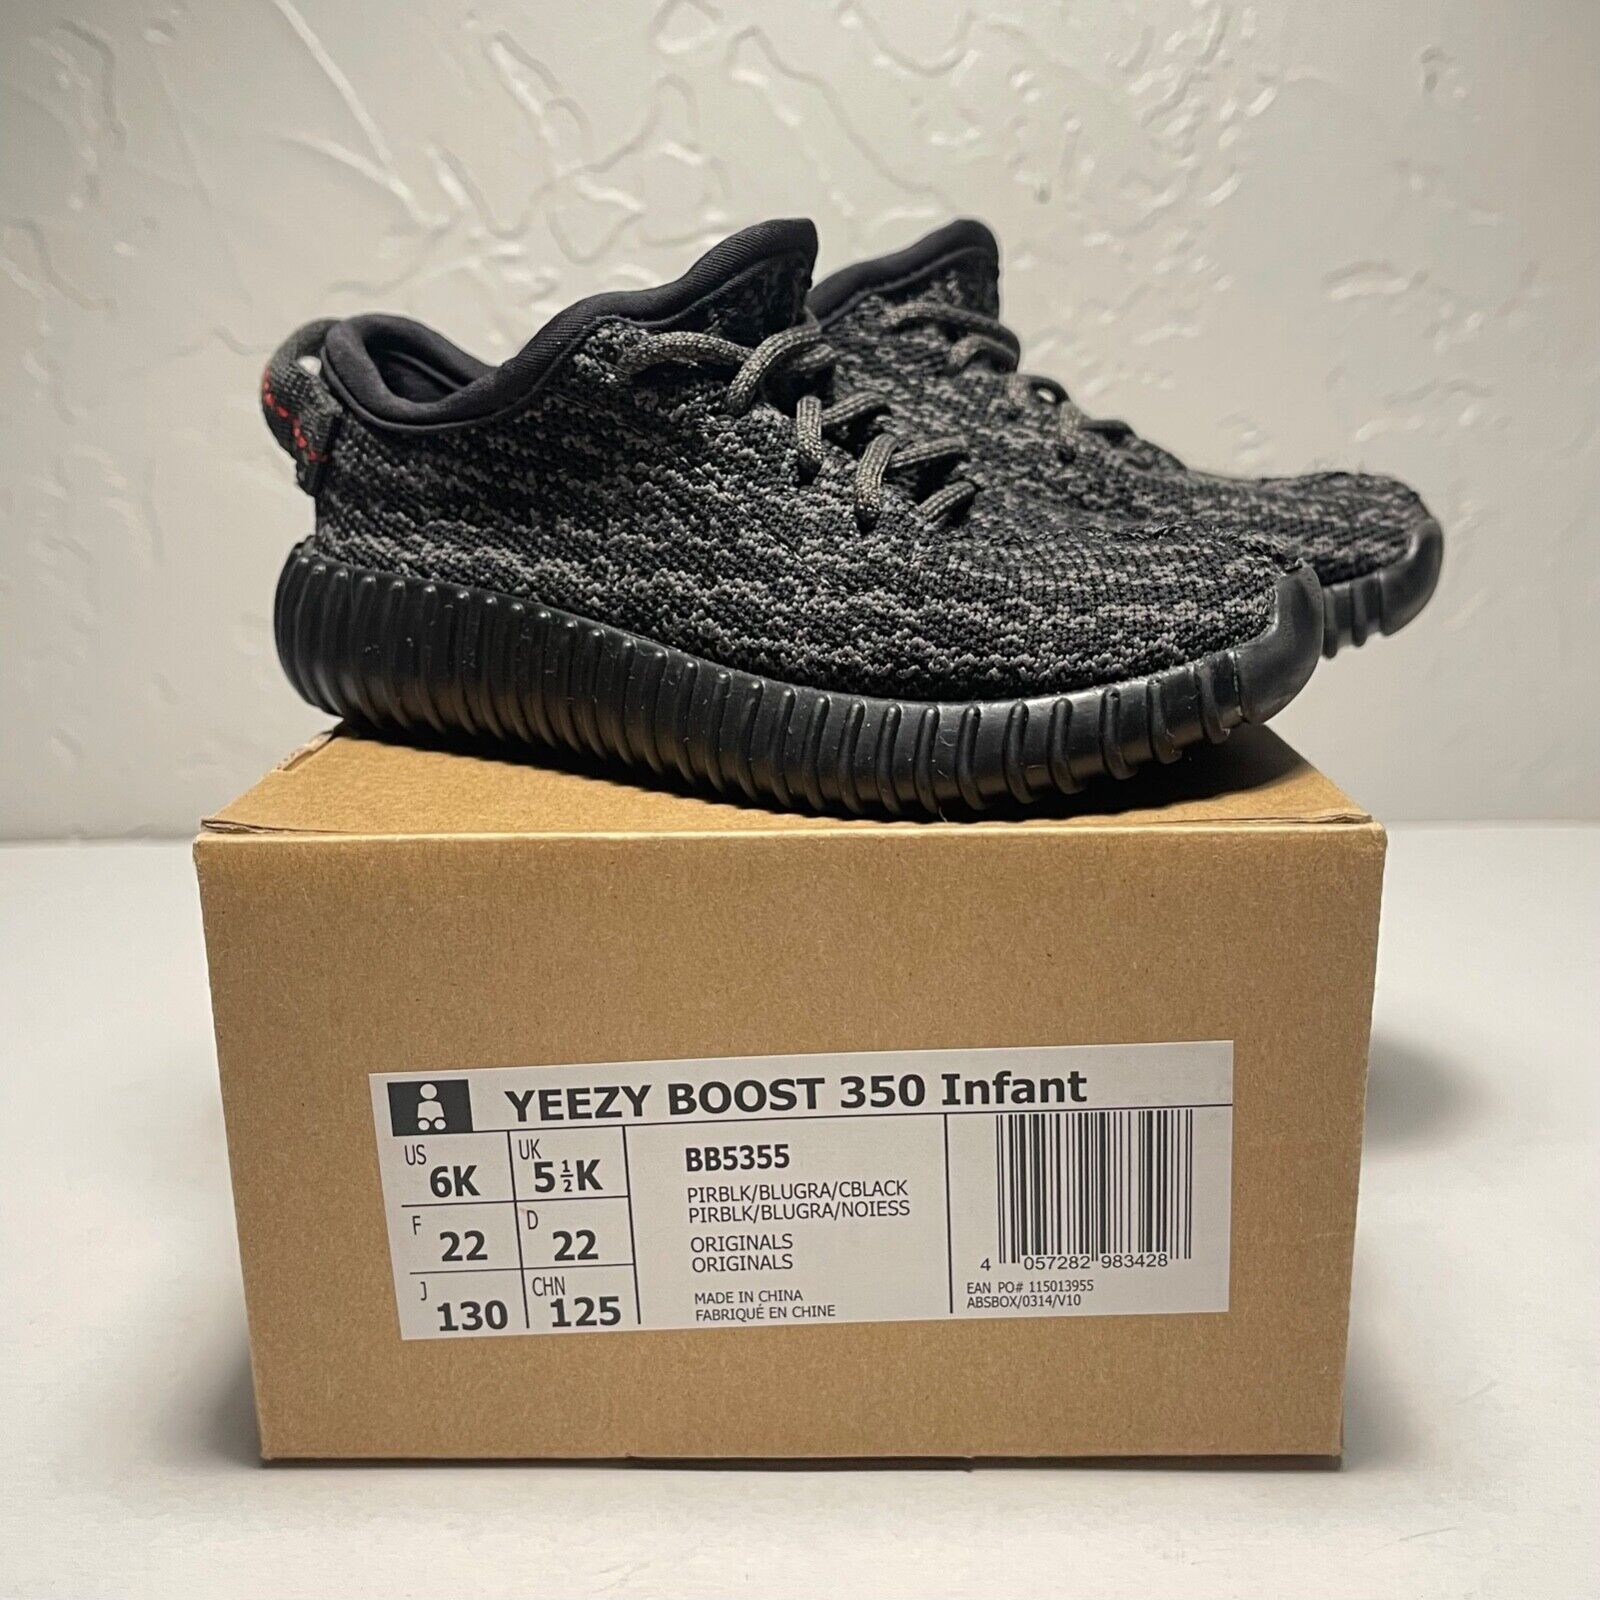 BOOST 350 INFANT Pirate Black BB5355 Size US 6K AUTHENTIC | eBay